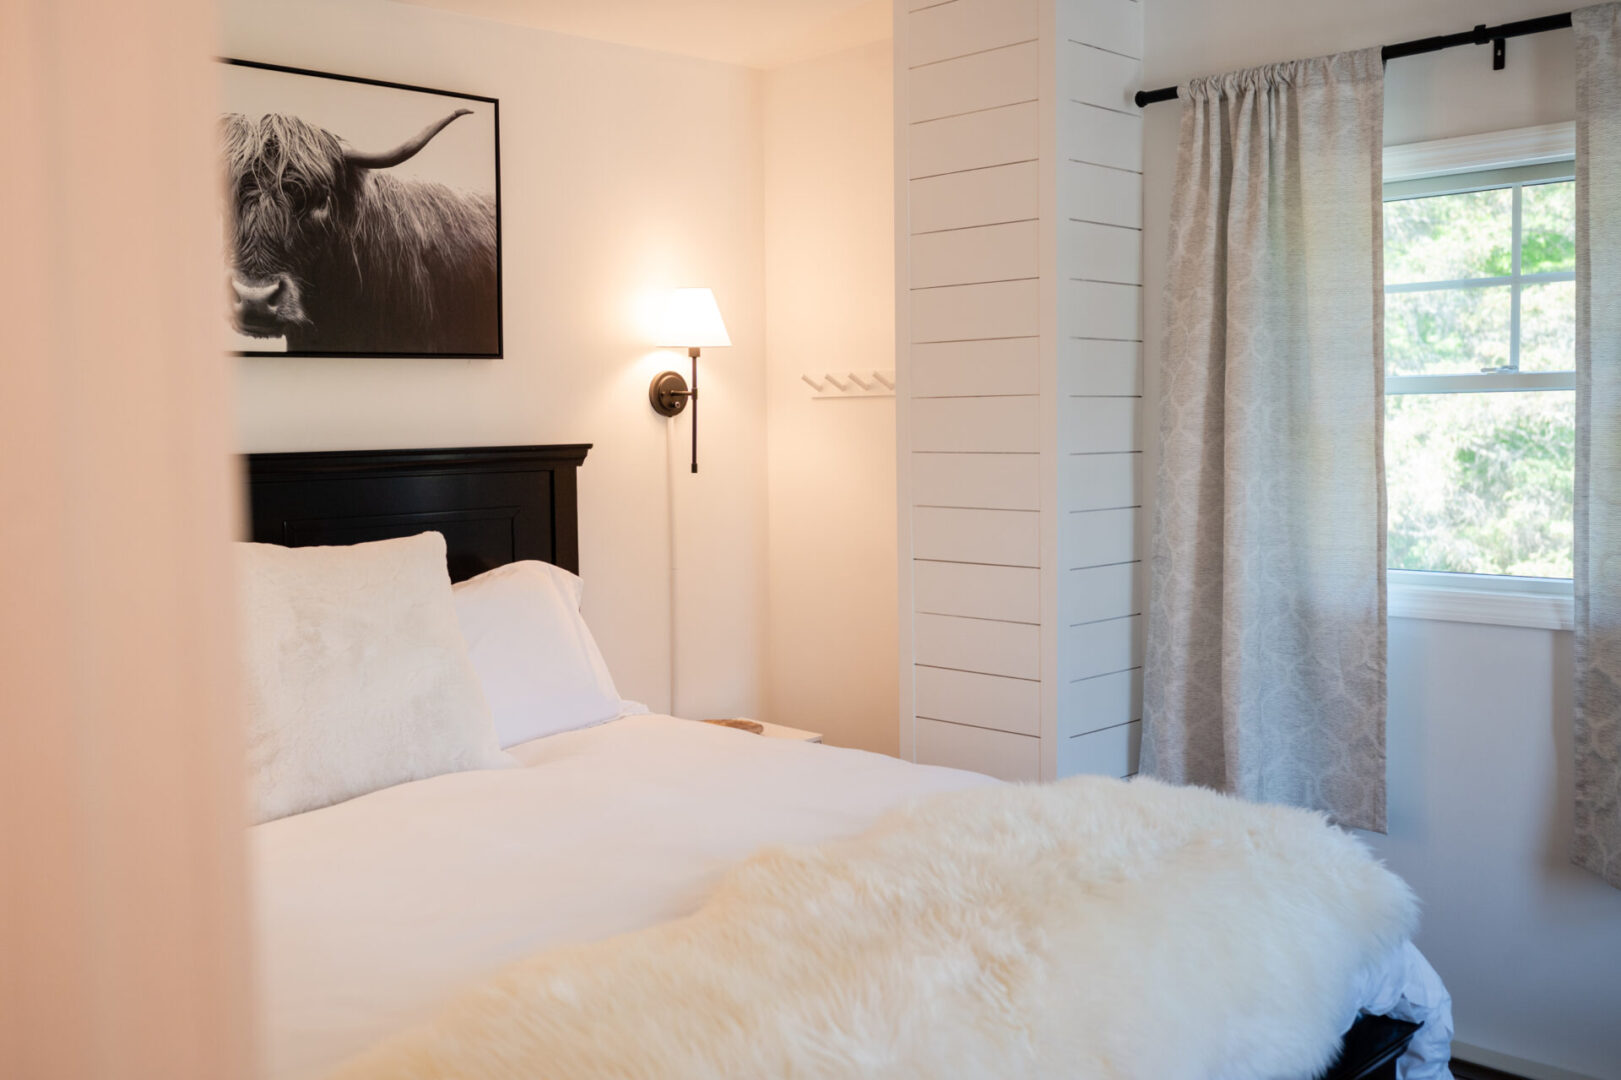 A bedroom with white walls and black headboard.